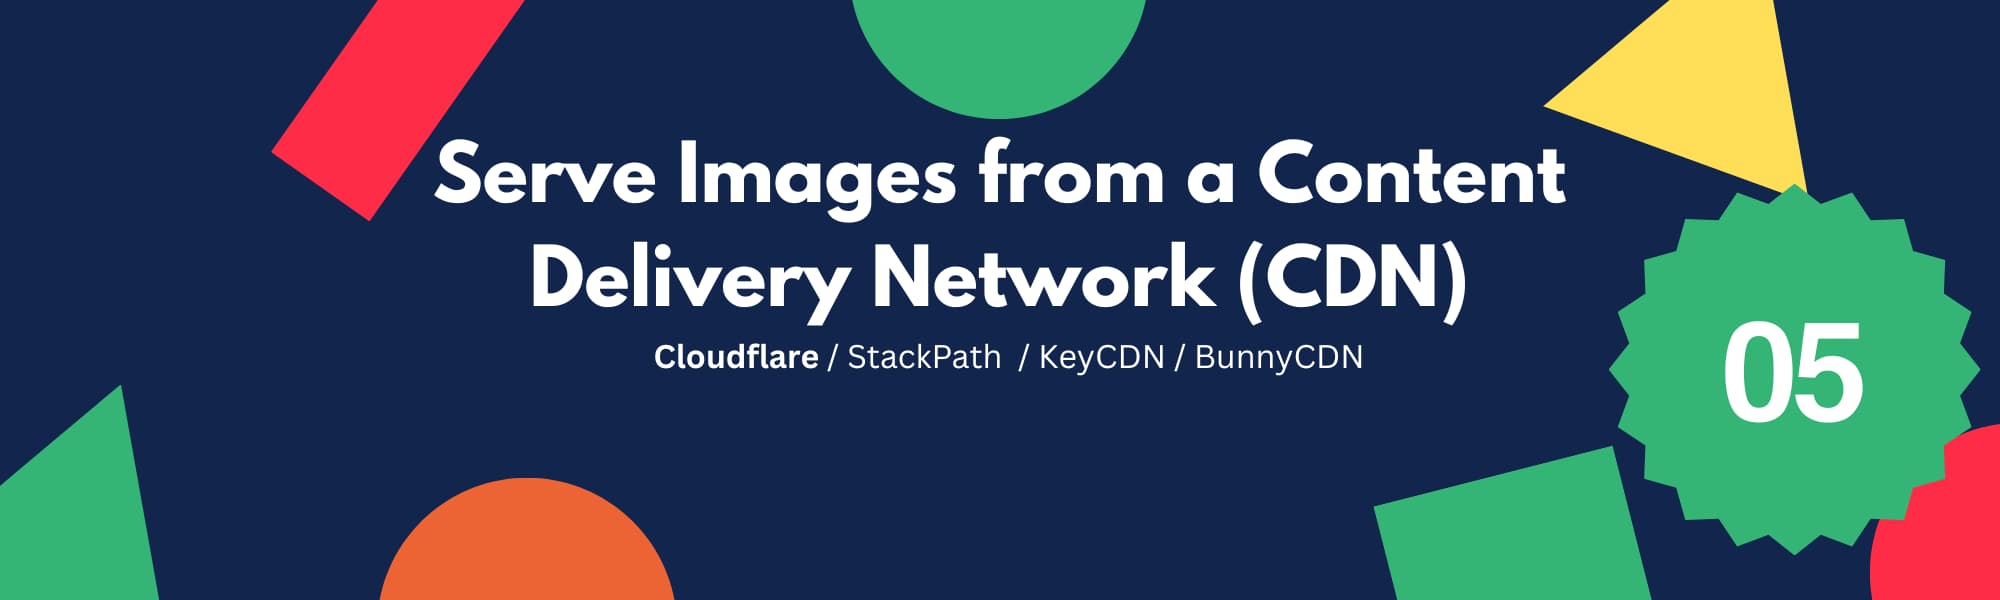 Serve Images from a Content Delivery Network (CDN)